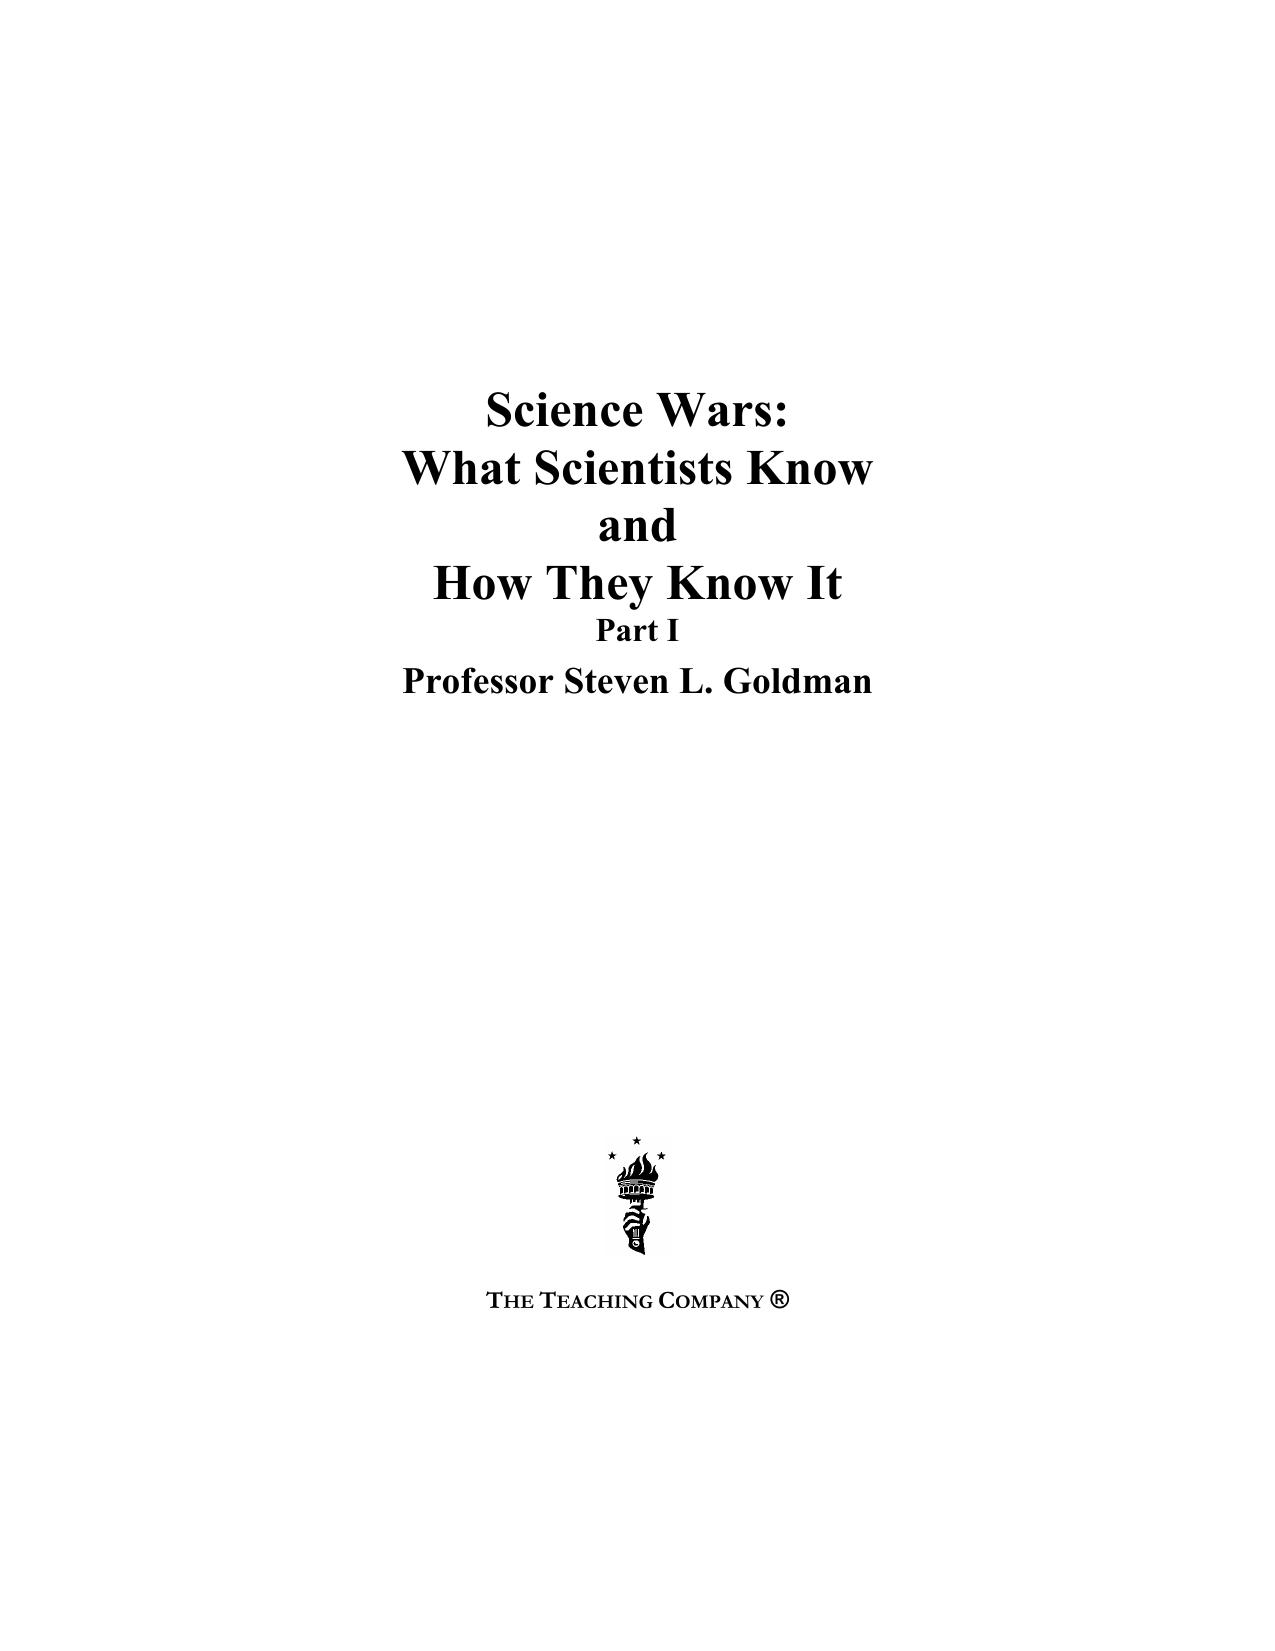 Science Wars - What Scientists Know and How They Know It - Part I